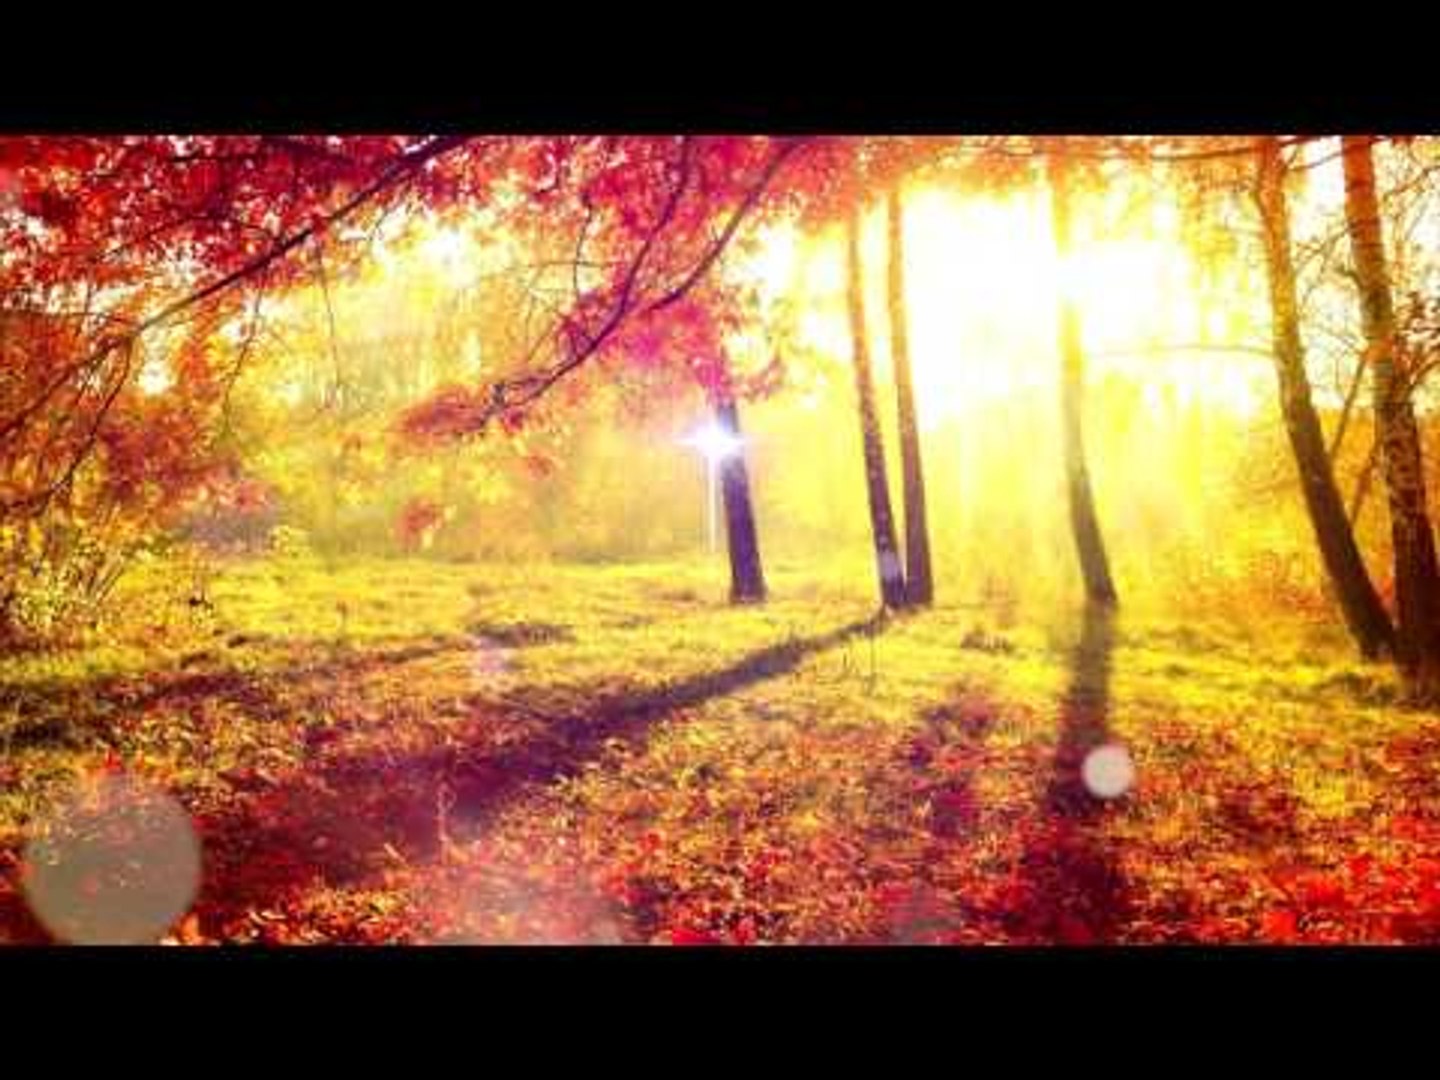 1 HOUR - Meditation Relax Music, Nature Sounds, Relaxing Music, Positive Music, Soft Relax Music